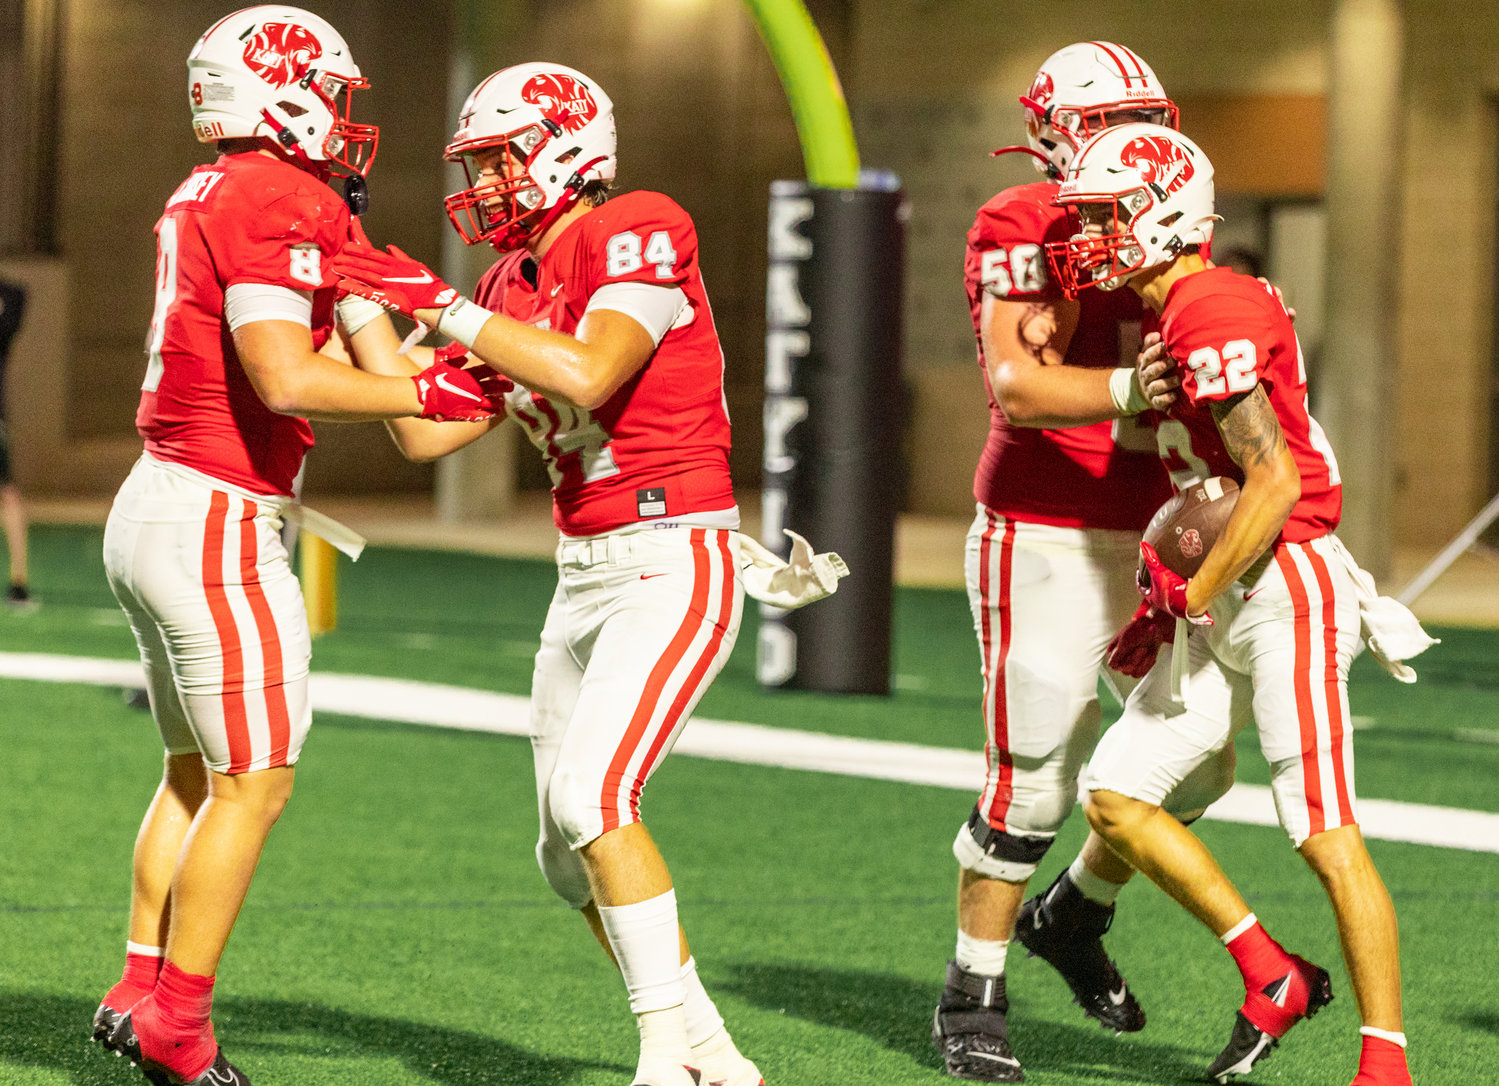 Katy’s Adam Jackson celebrates with his teammates after catching a touchdown pass during Friday’s game between Katy and Atascocita at Legacy Stadium.